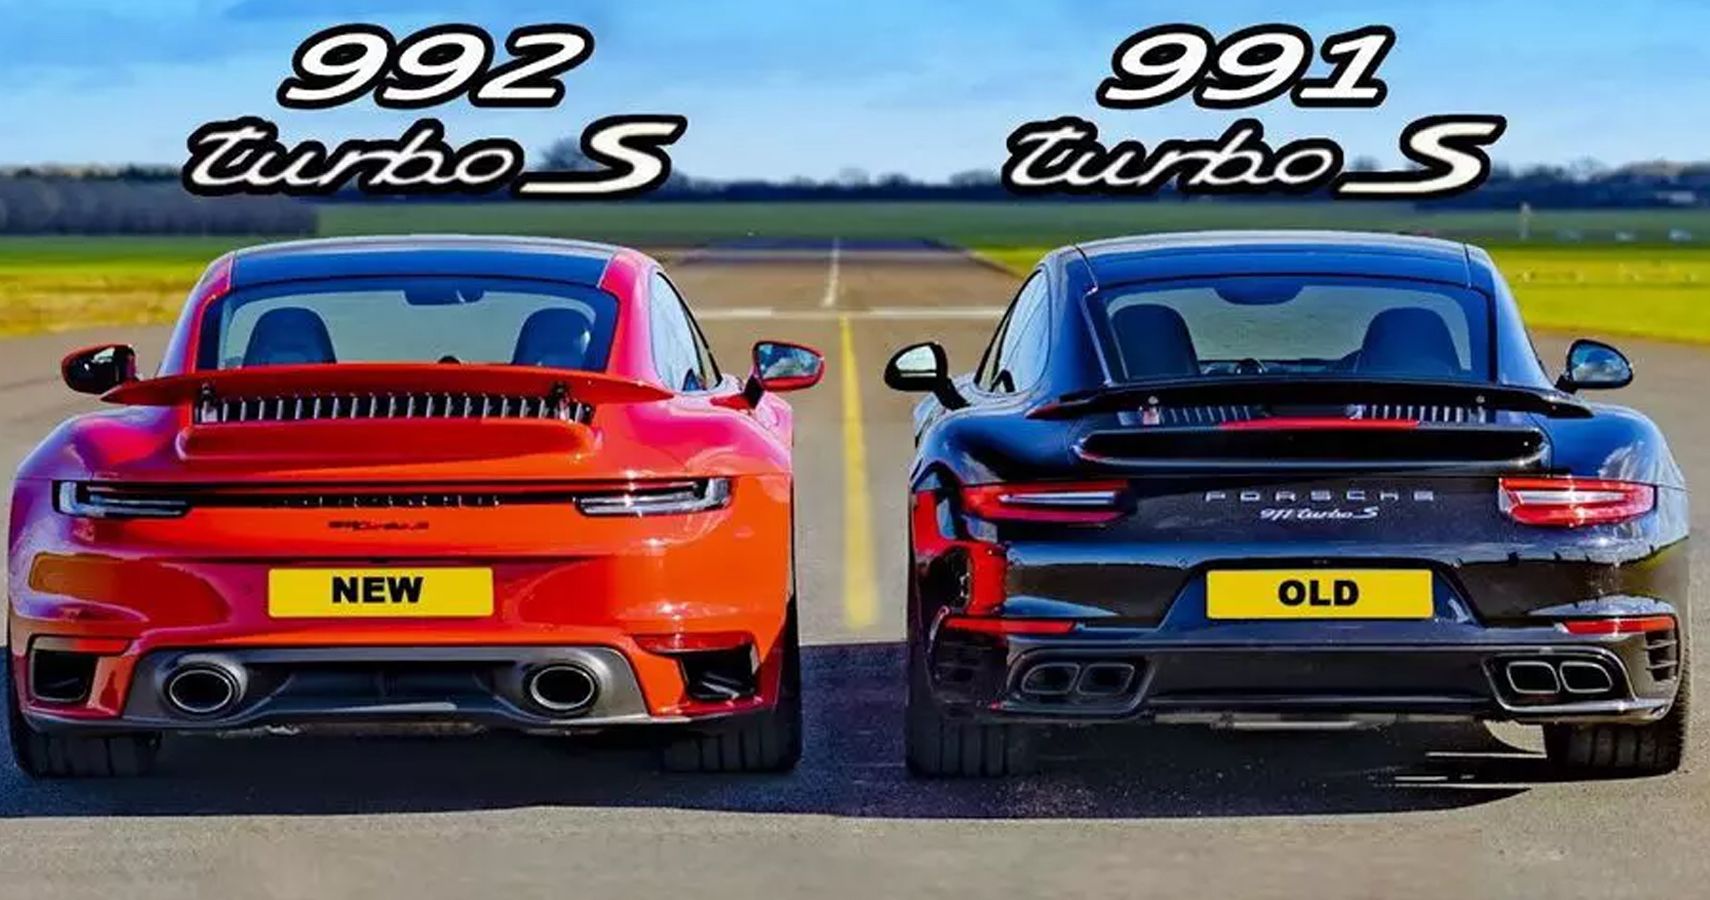 New And Slightly Less New Porsche 911 Turbo S Models Drag Race And Then Some